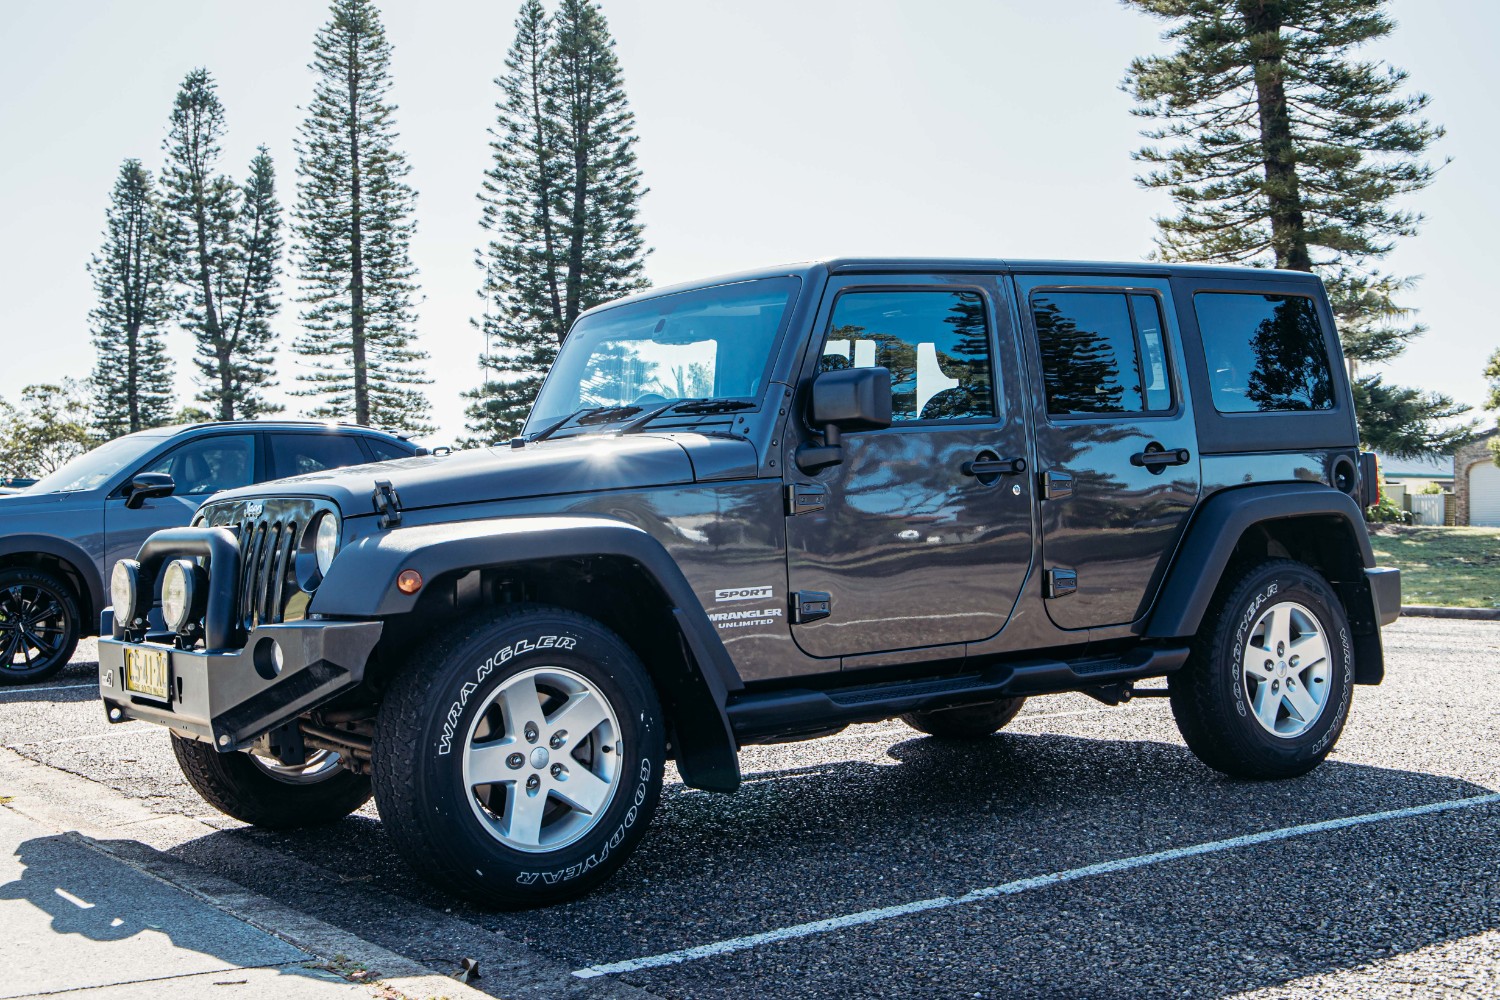 2014 Jeep Wrangler Unlimited - Sport Convertible Image 7